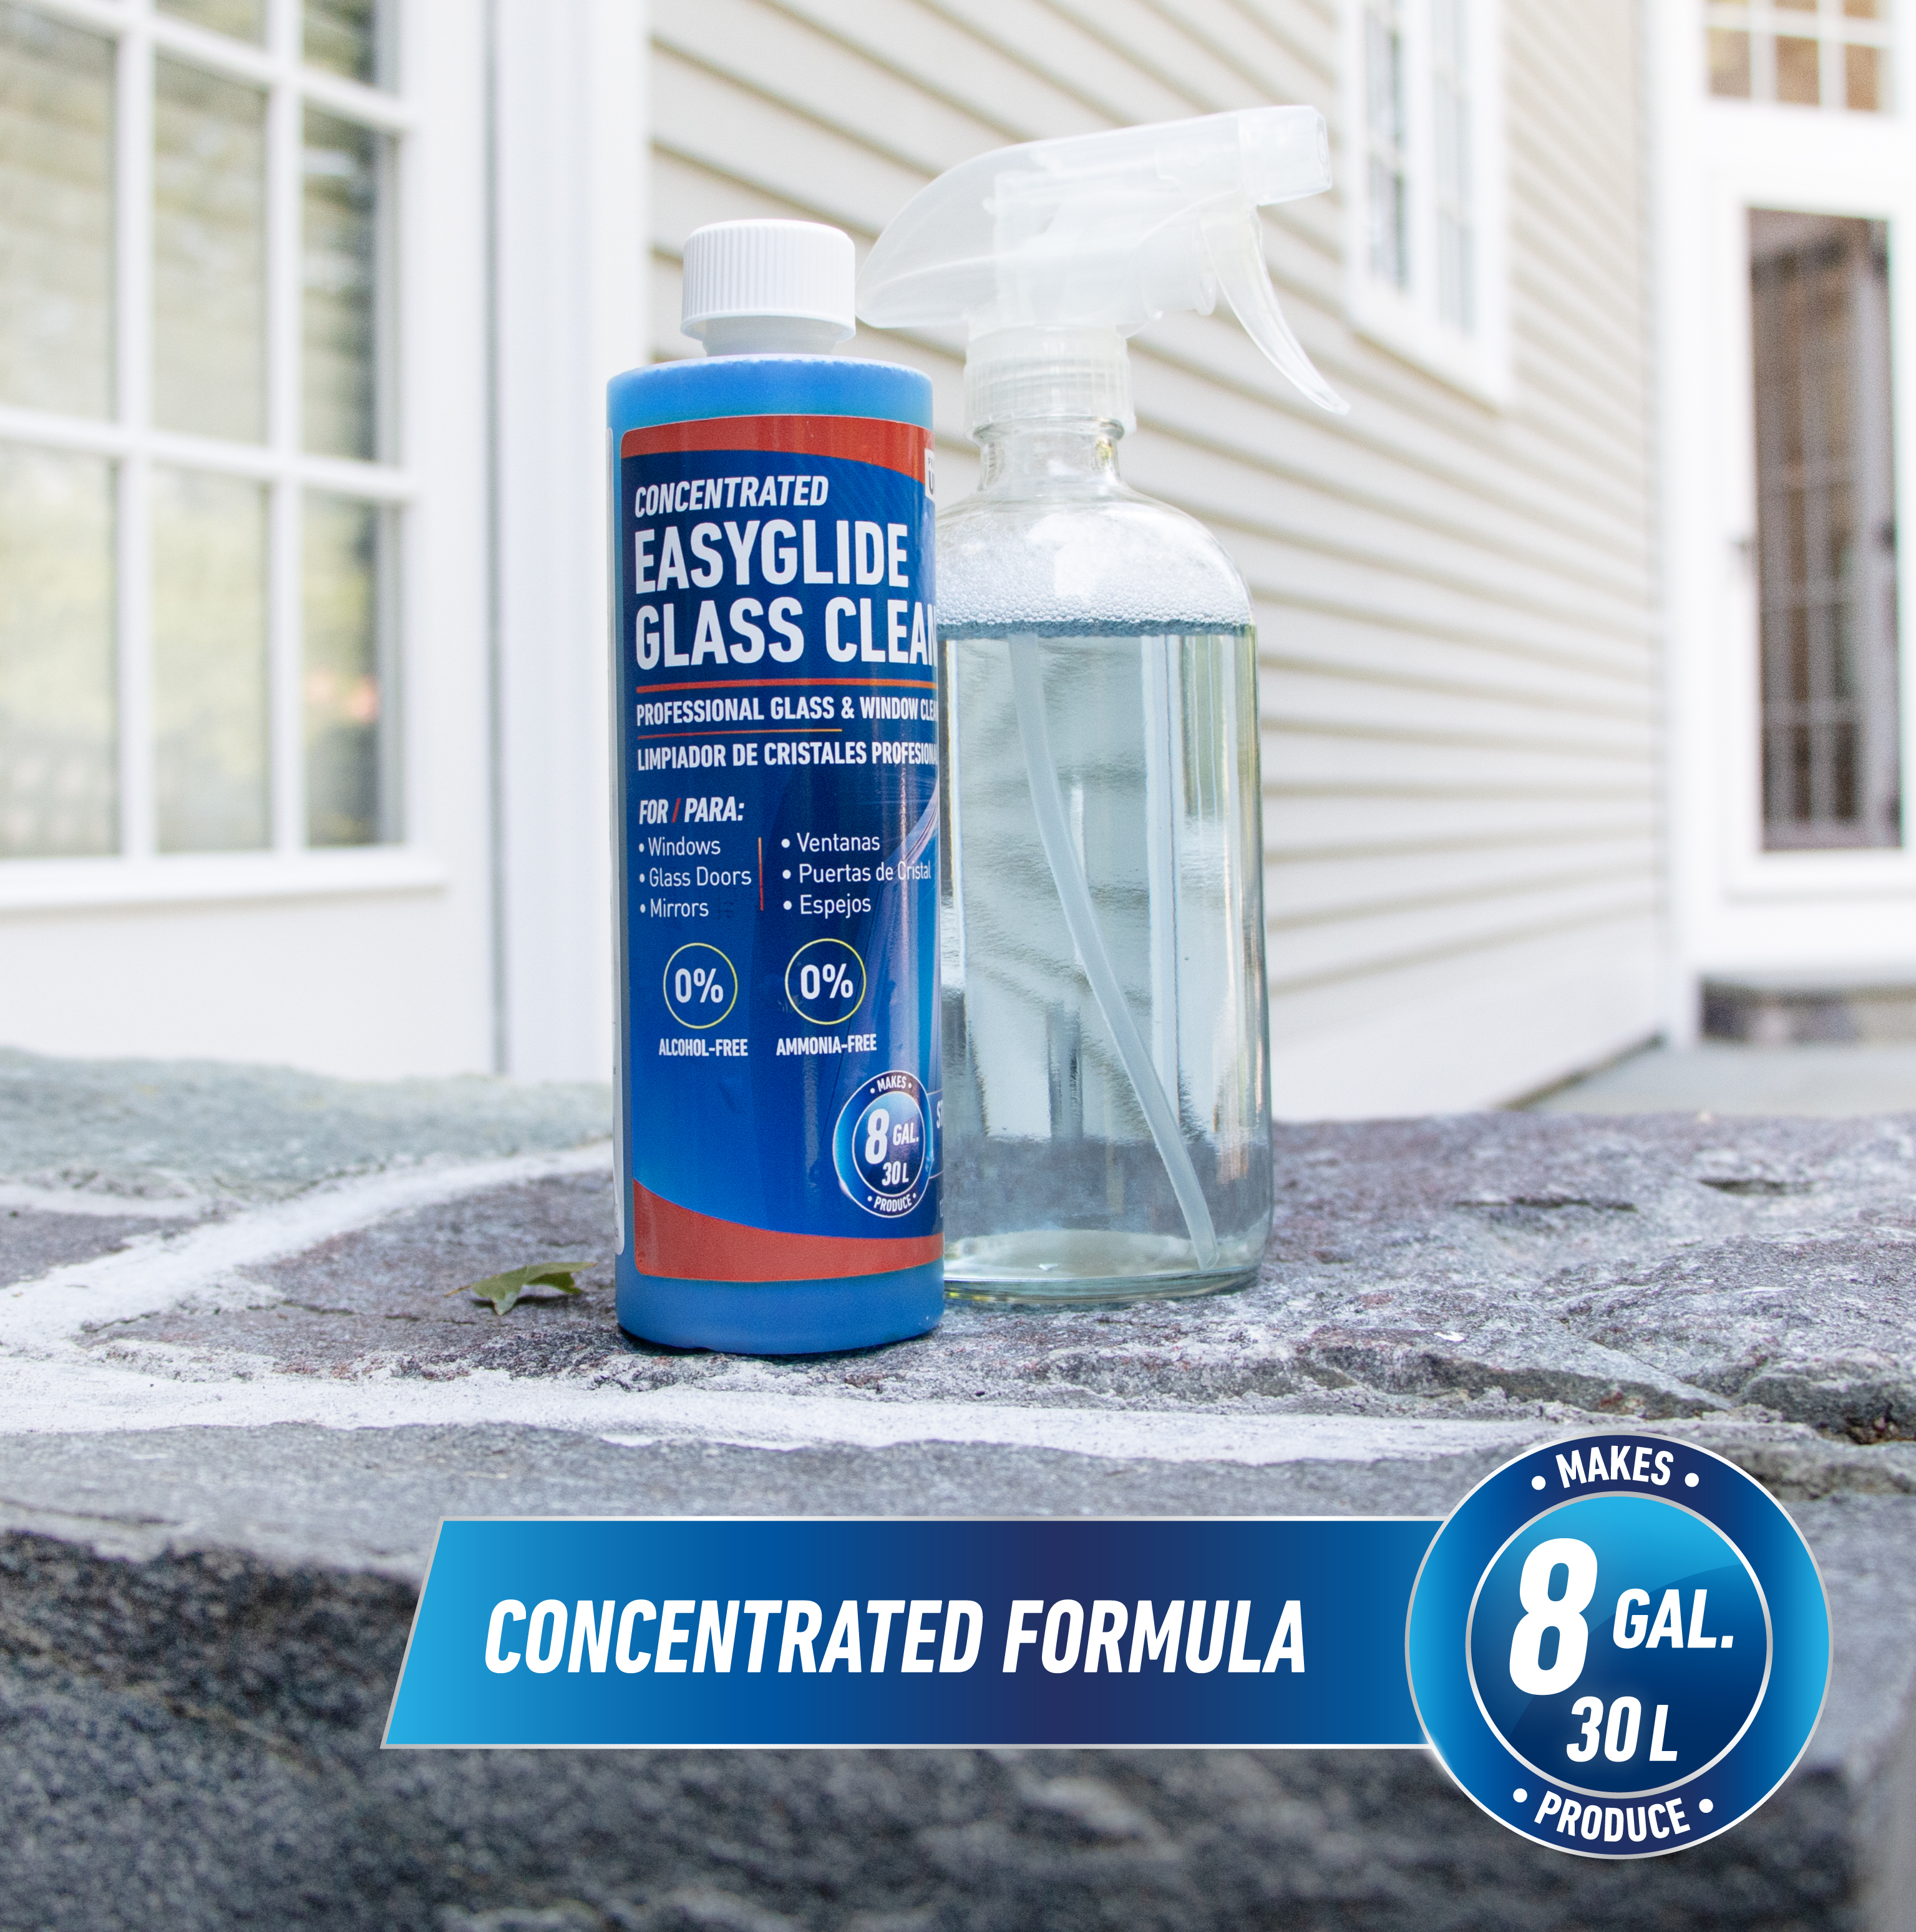 Unger 32 oz. Concentrate Liquid Window Cleaning Solution 0400